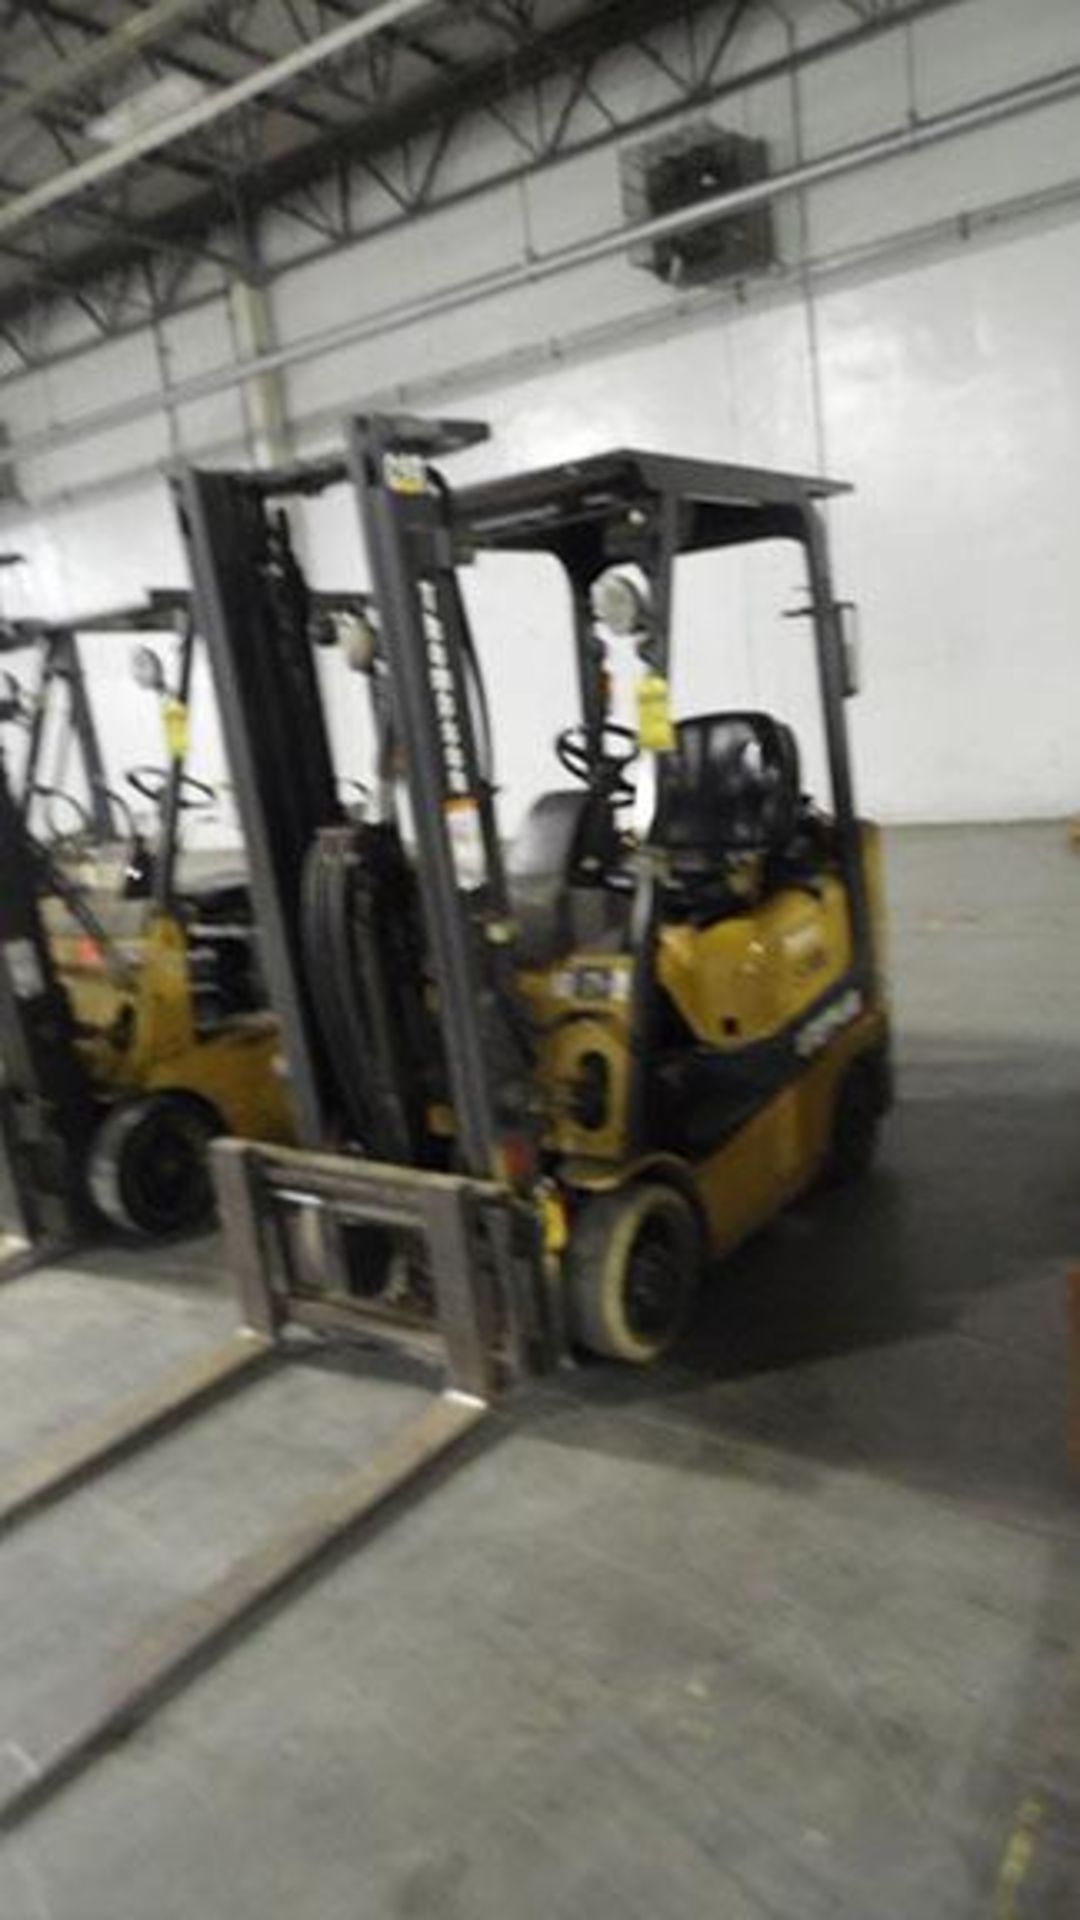 CAT 4,000 LB. CAPACITY FORKLIFT; MODEL GC18, S/N AX81DC1133, 2-STAGE MAST, LP GAS, SOLID TIRES, 45''